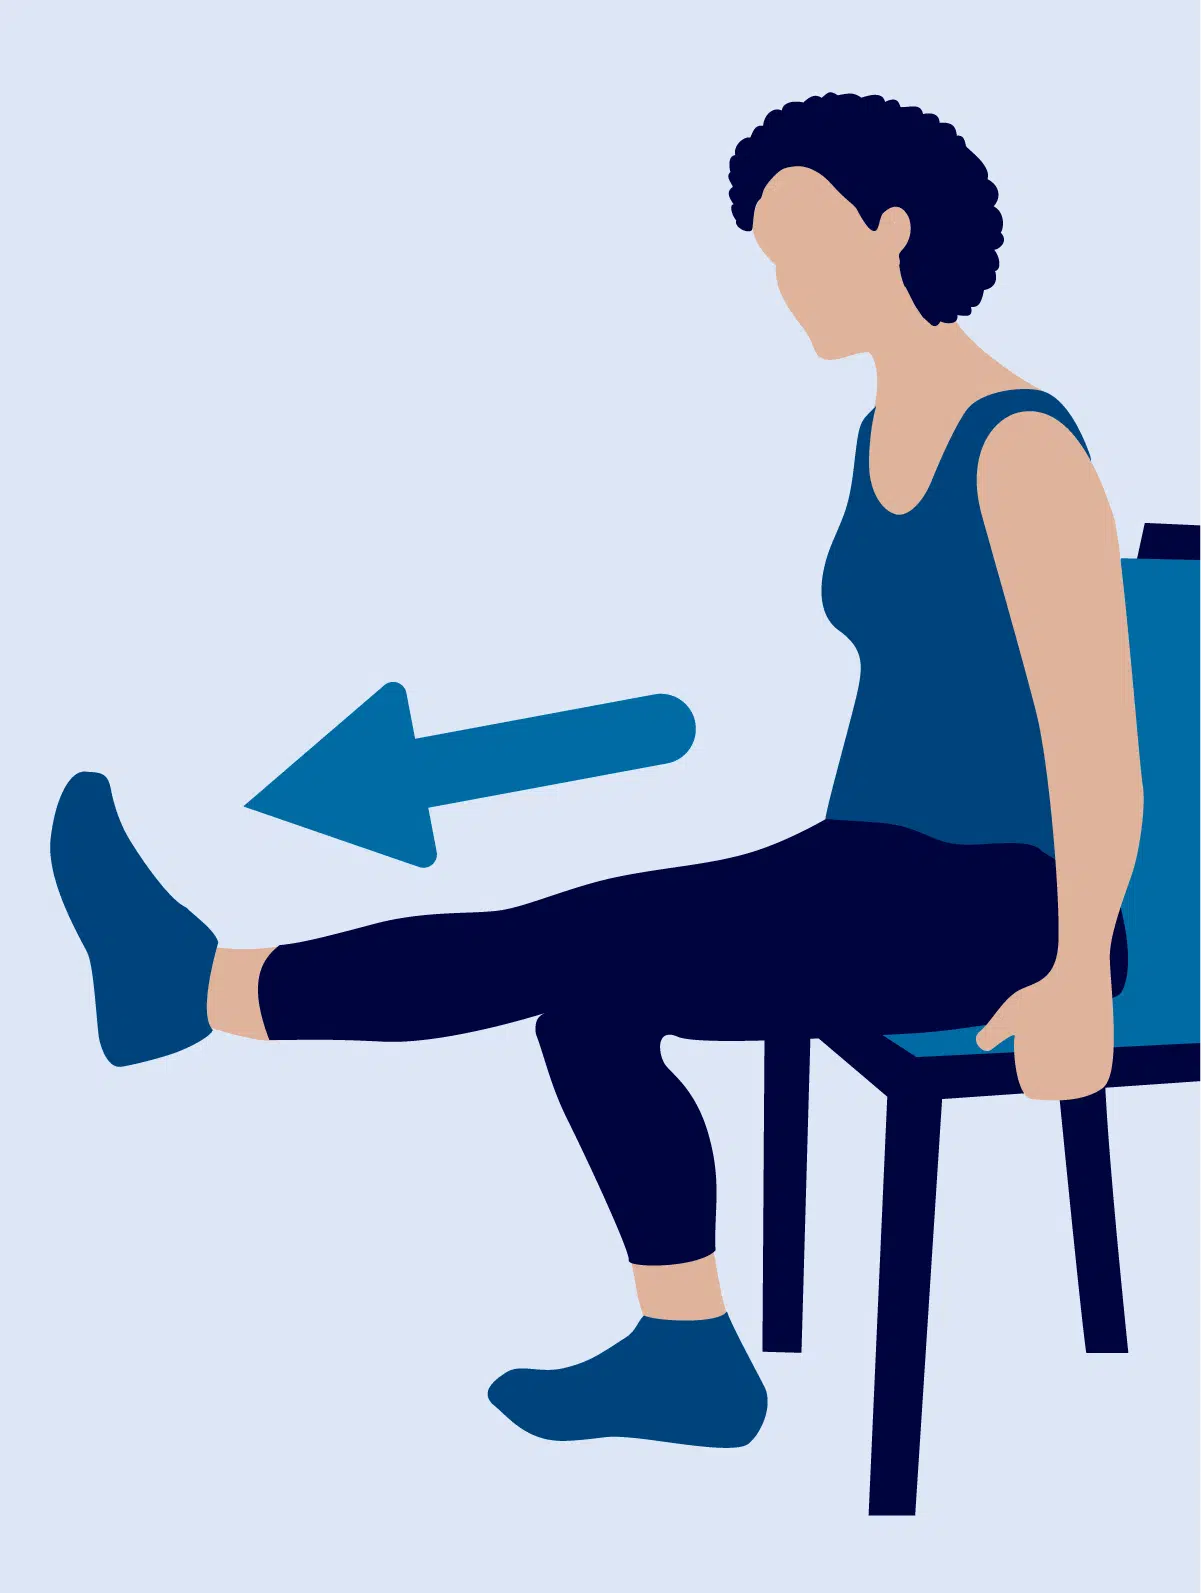 View source image  Senior fitness, Chair exercises, How to stay